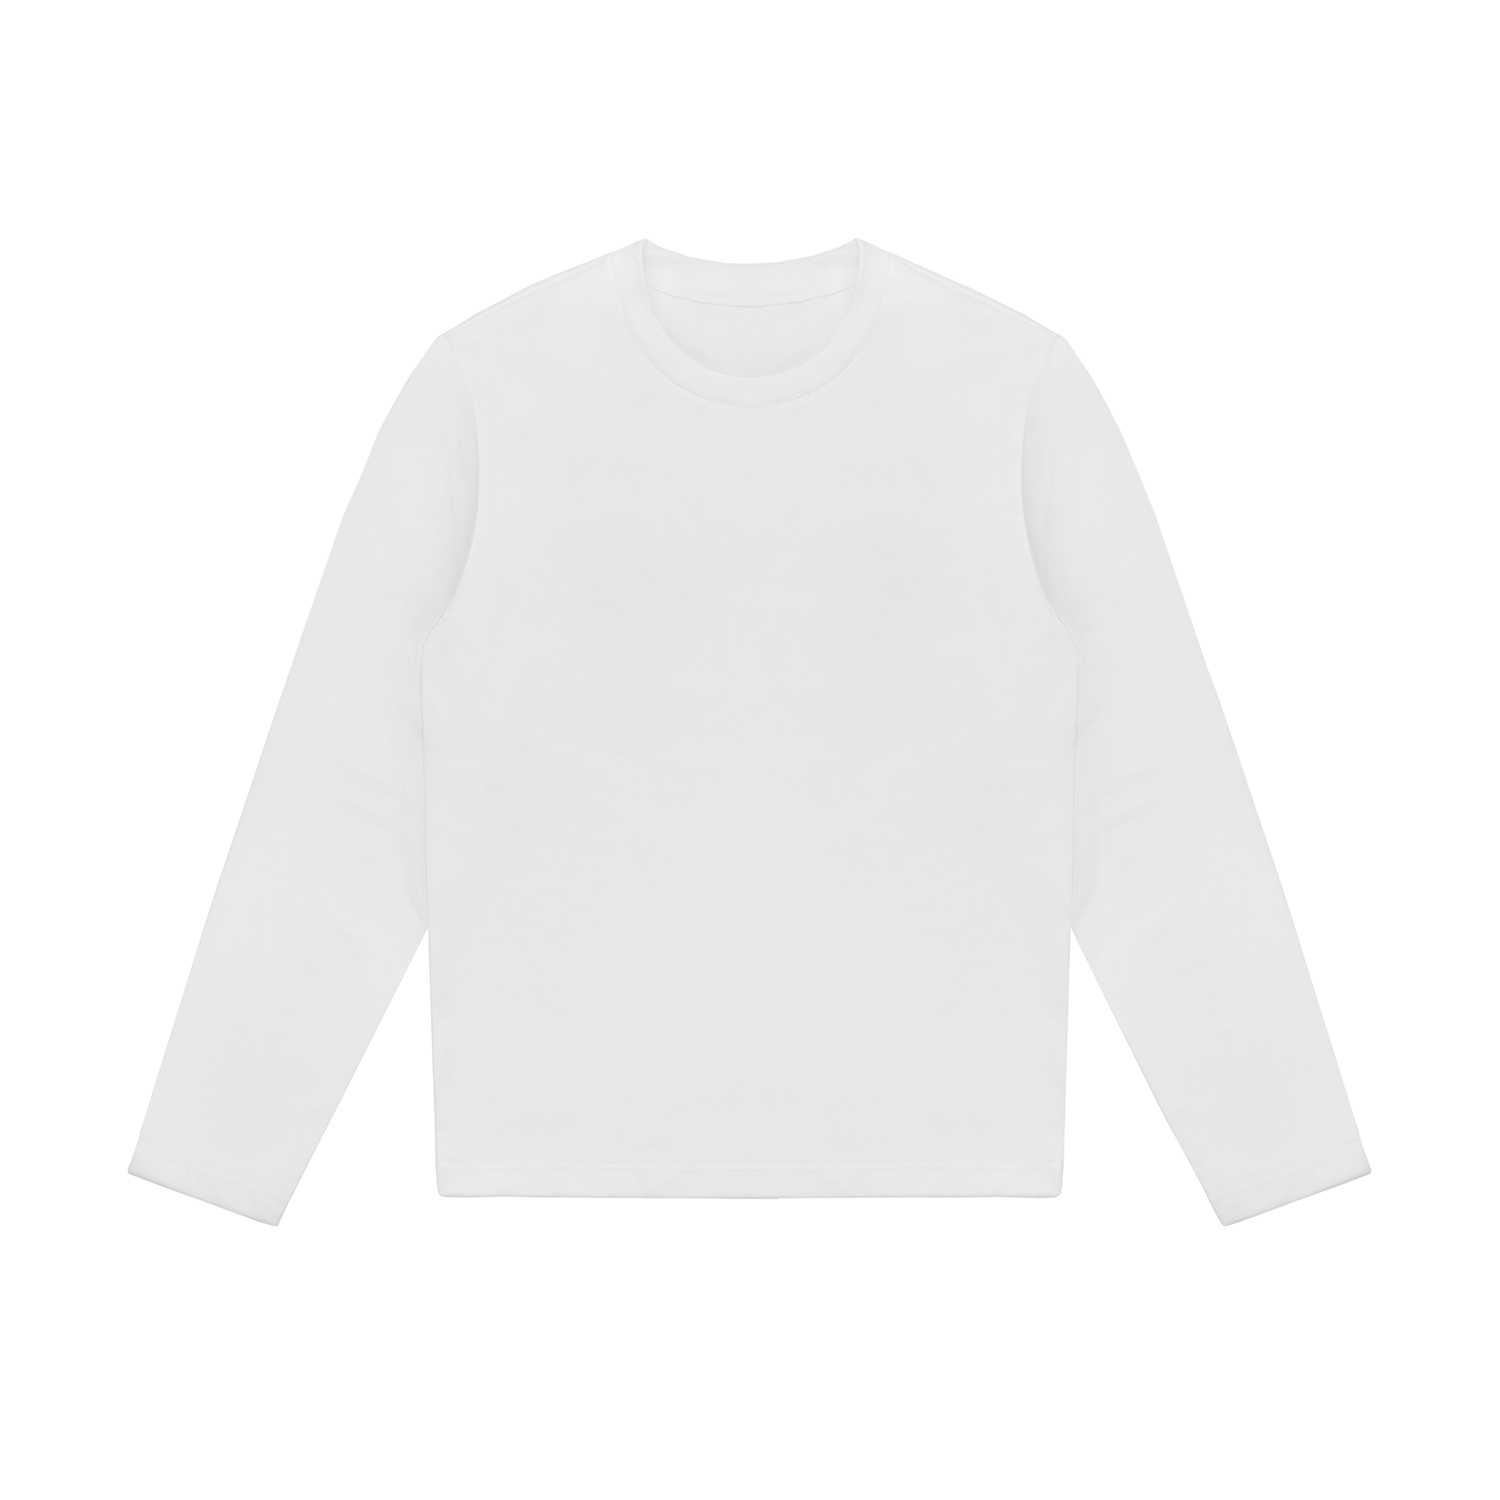 All-Over Print Unisex Quick Dry Long Sleeve Tee | HugePOD